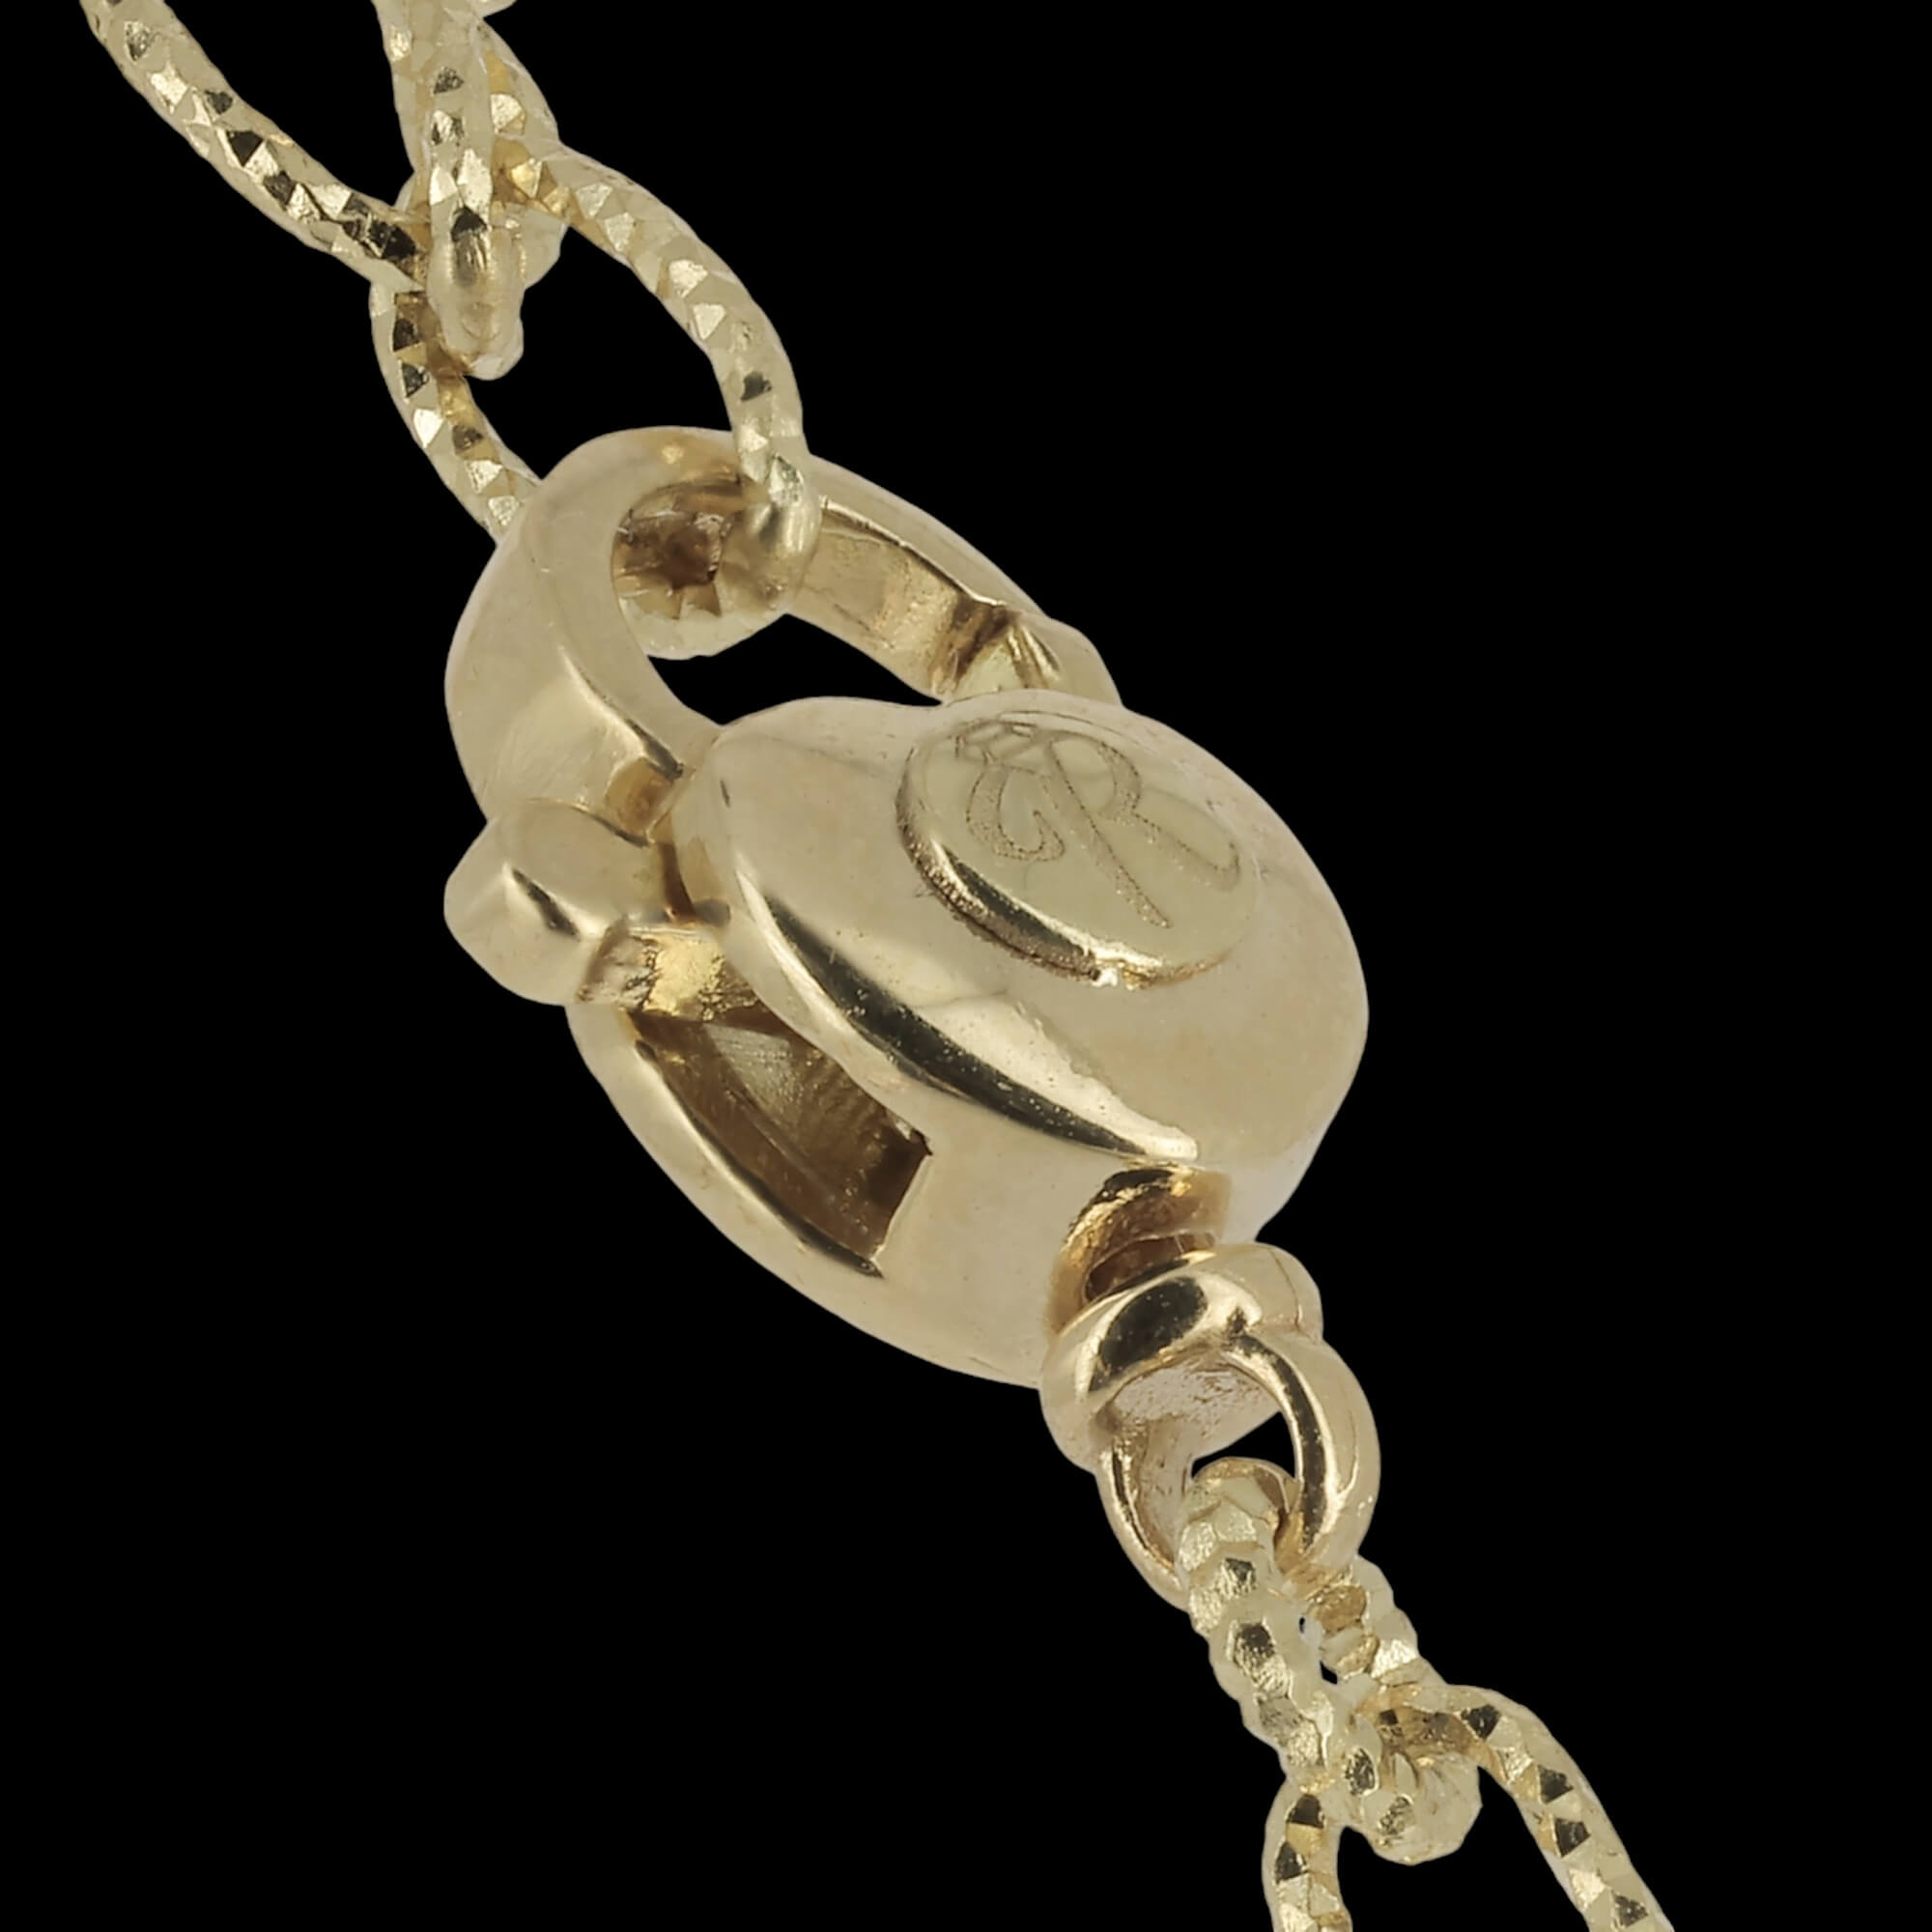 Golden necklace of 18kt gold with an edited pendant